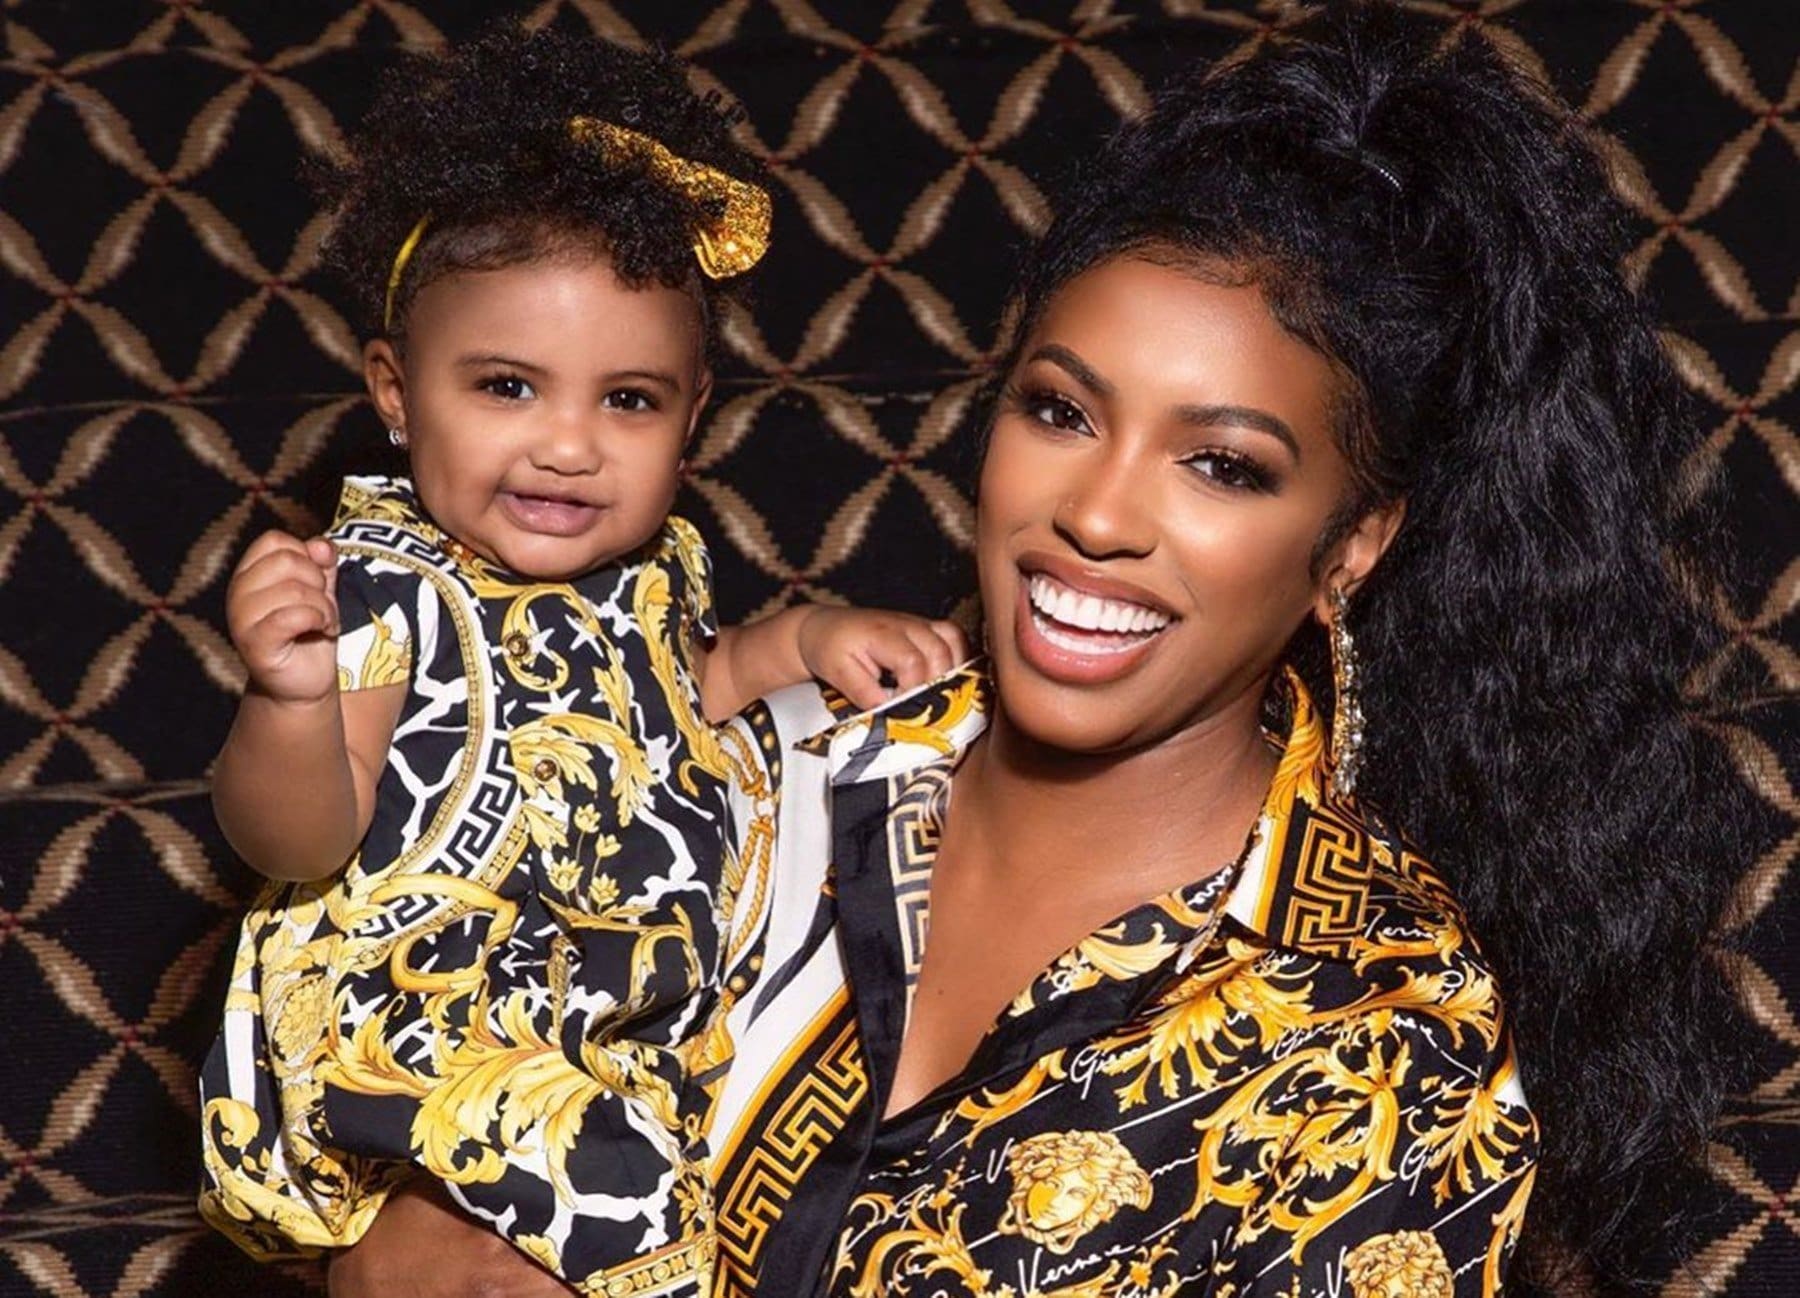 Porsha Williams Will Make Your Day With This Video Featuring Her Baby Girl, Pilar Jhena